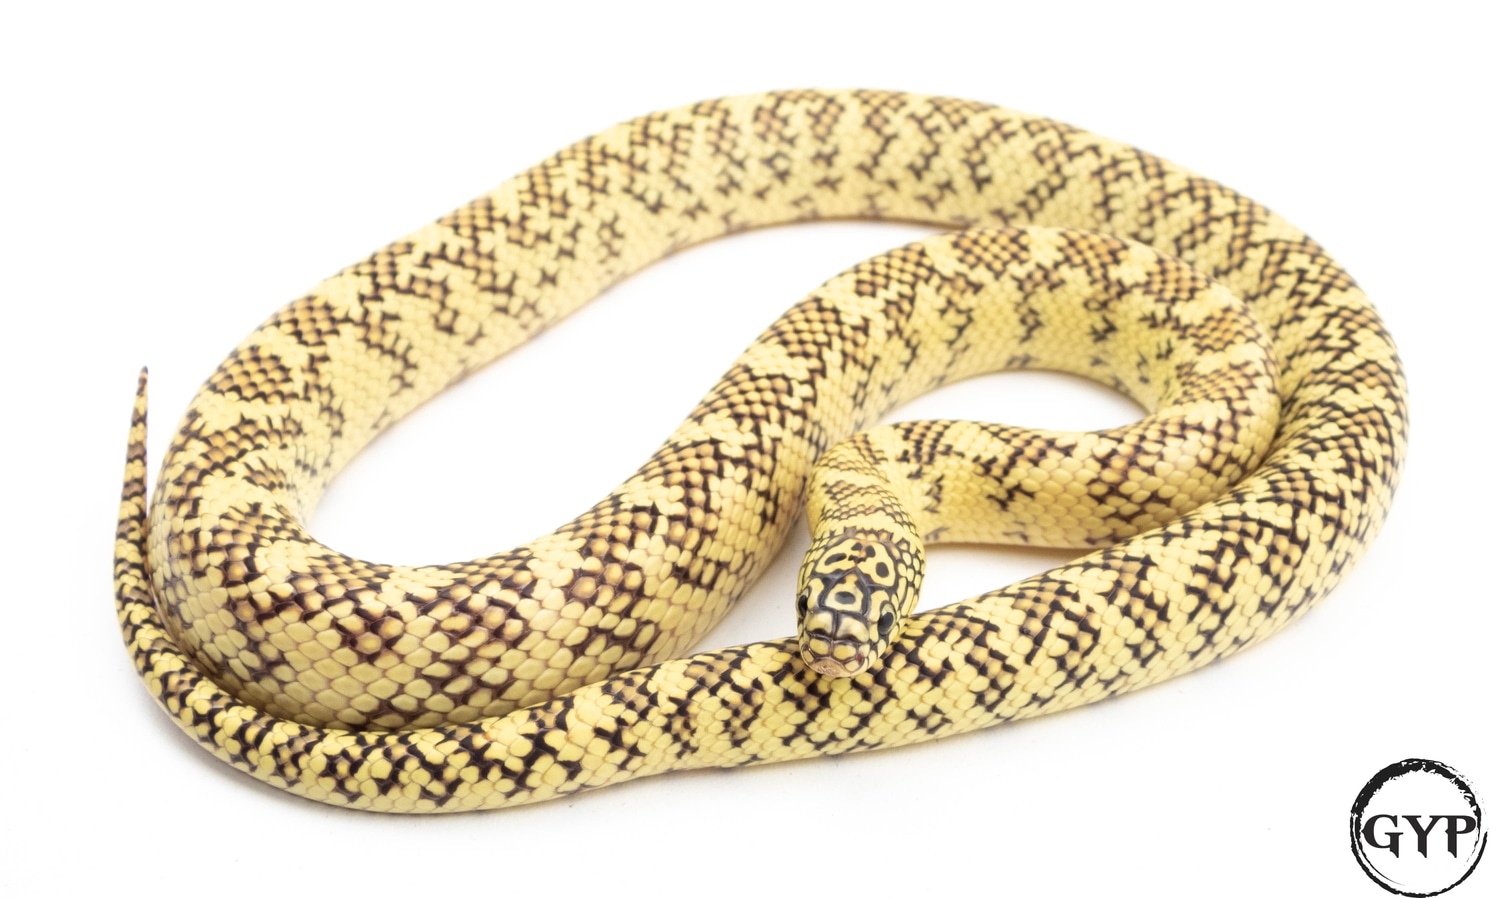 HyperXanthic Florida Kingsnake by Gopher Your Pet